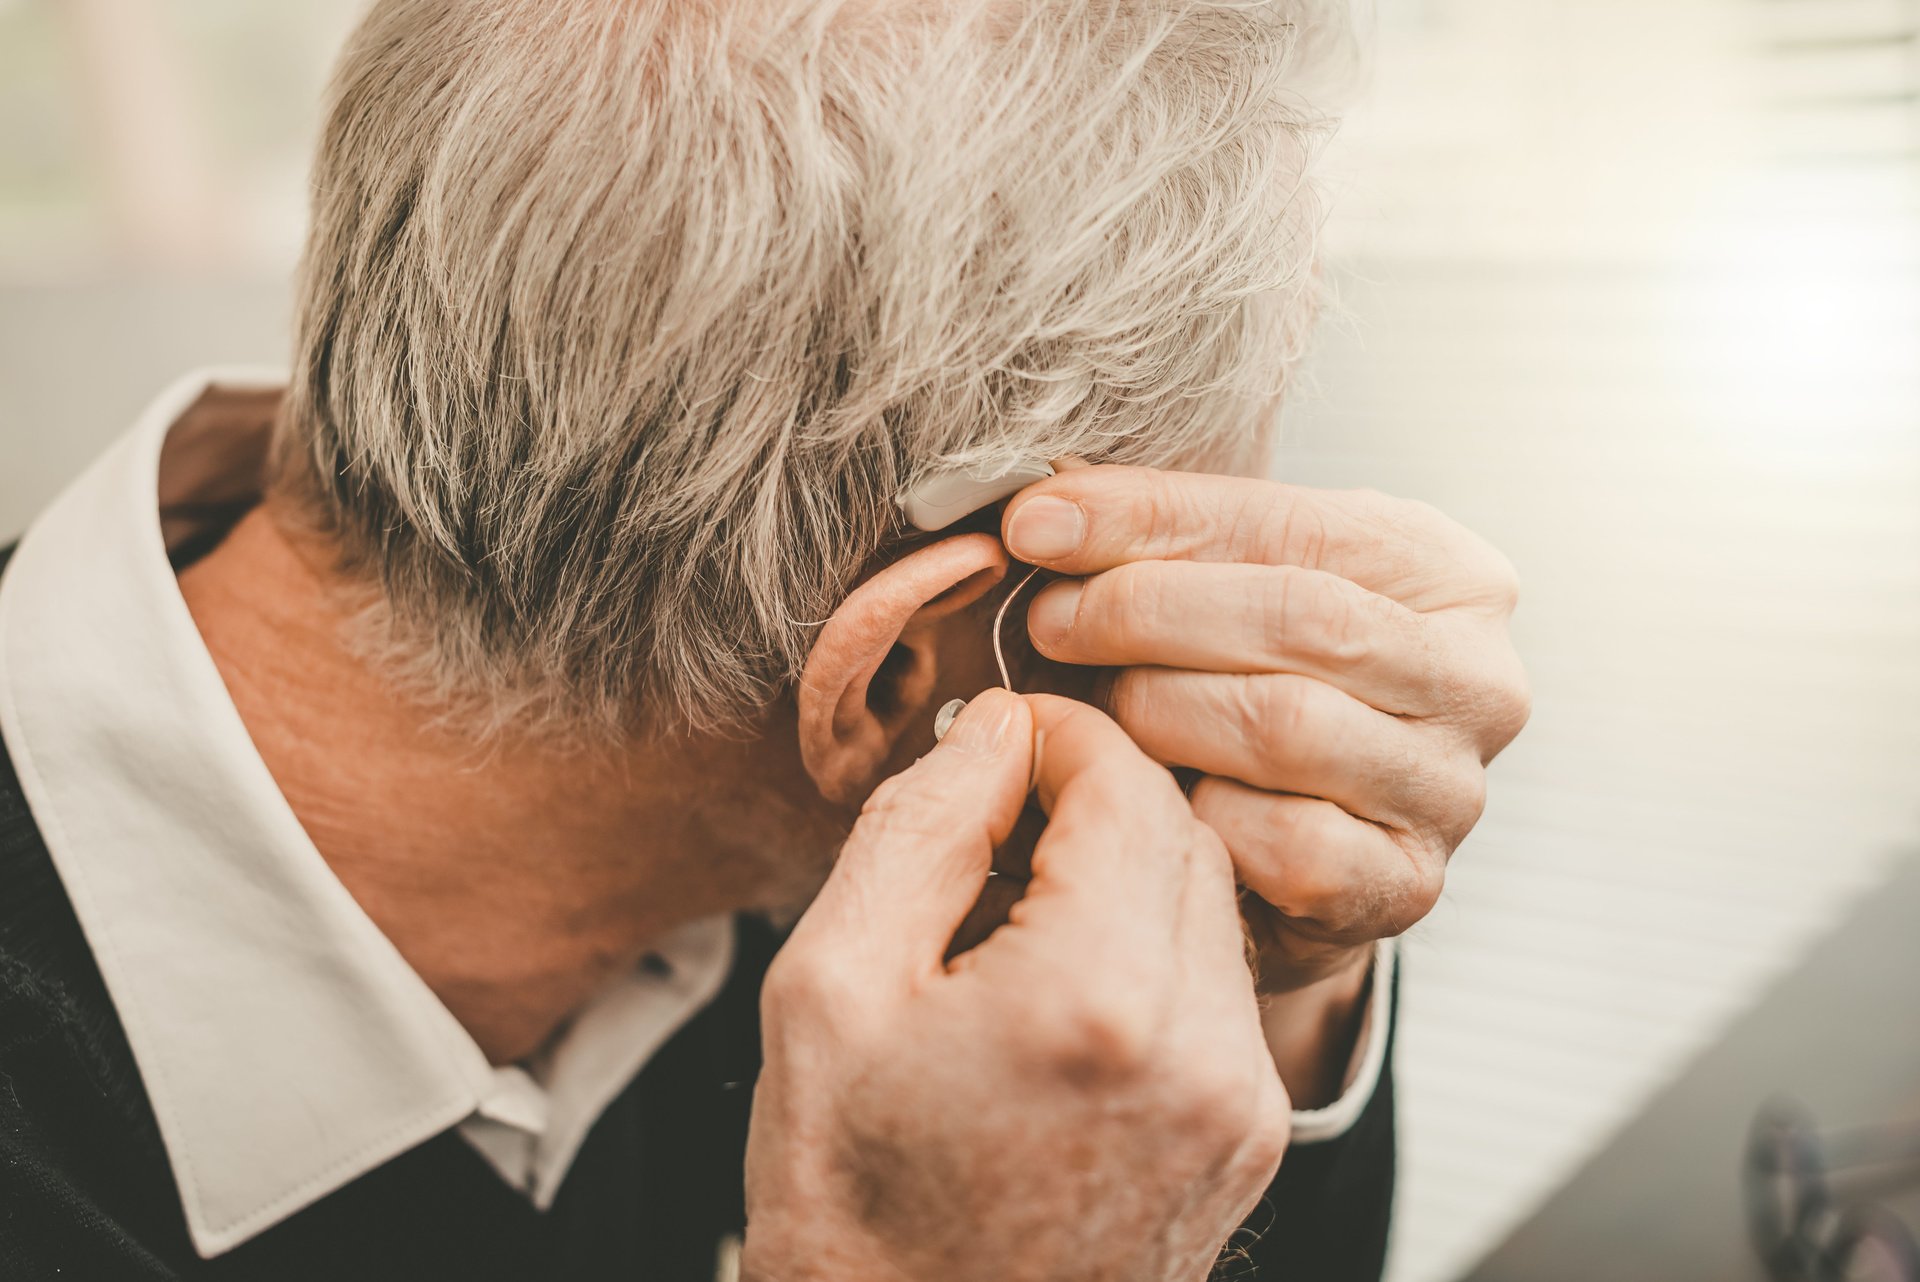 How long should my hearing aids last?